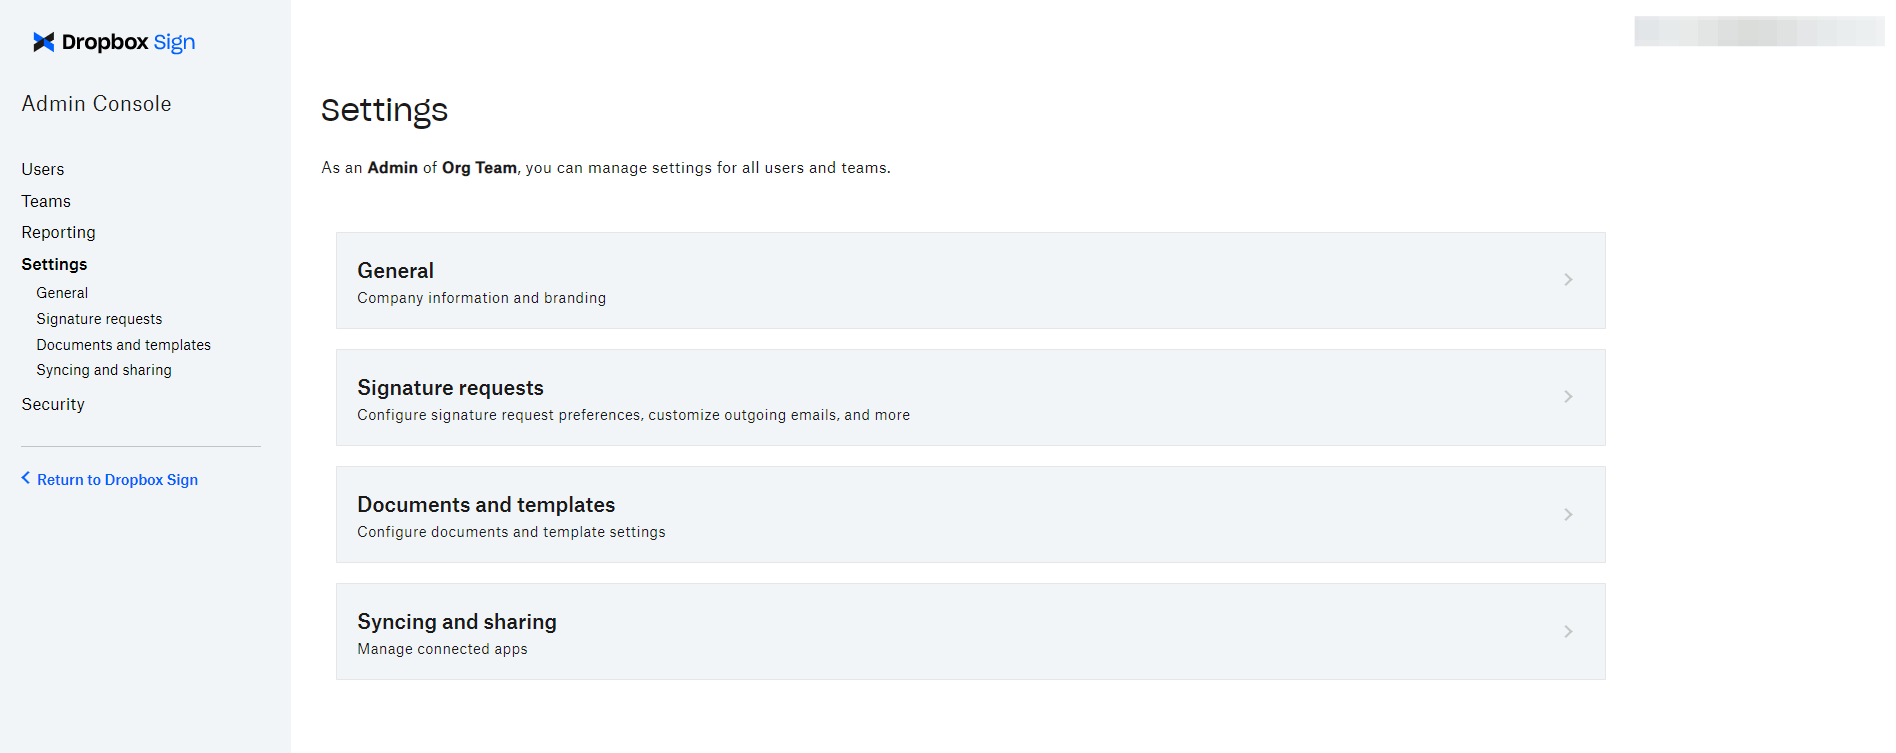 The Dropbox Sign Admin Console settings page.